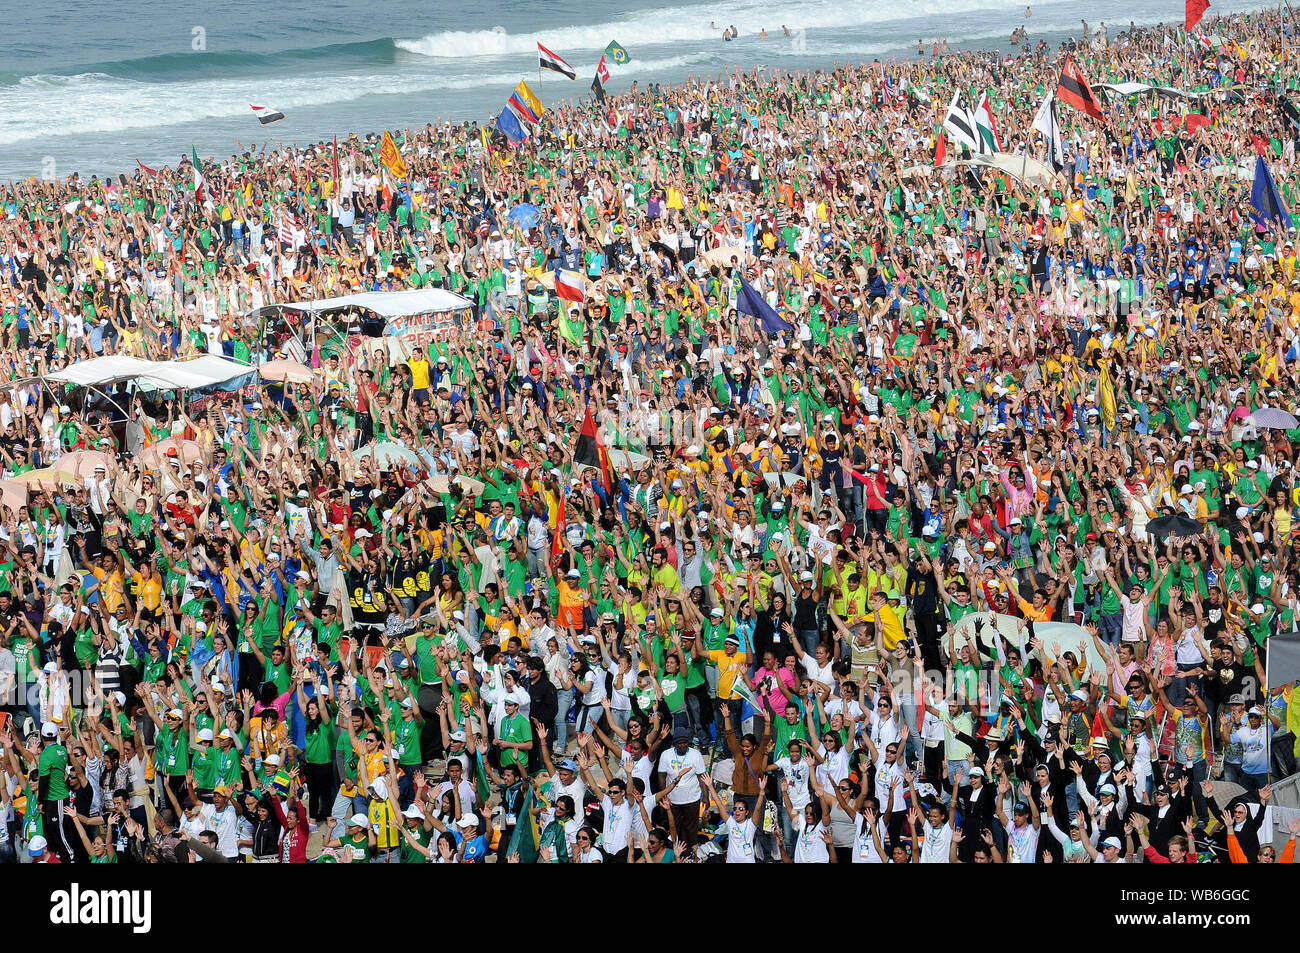 Rio de Janeiro, July 28, 2013. Public of believers make flash mob during World Youth Day on the beach in Copacabana, Brazil Stock Photo